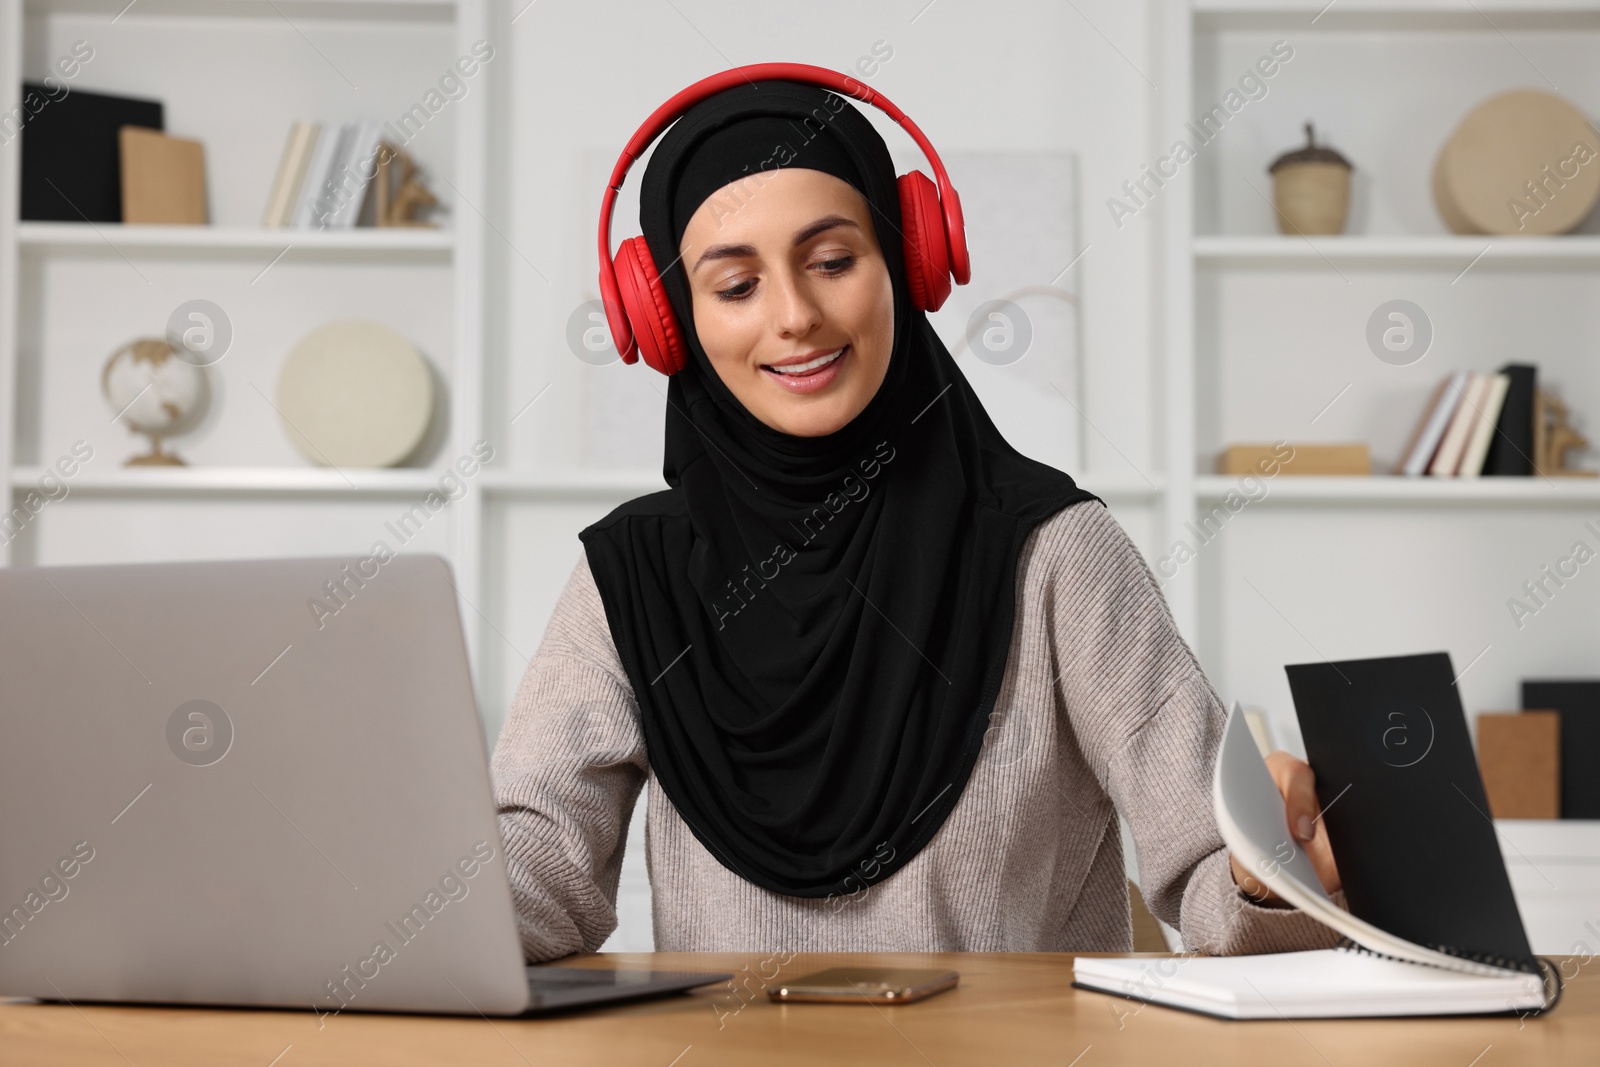 Photo of Muslim woman in headphones studying near laptop at wooden table in room